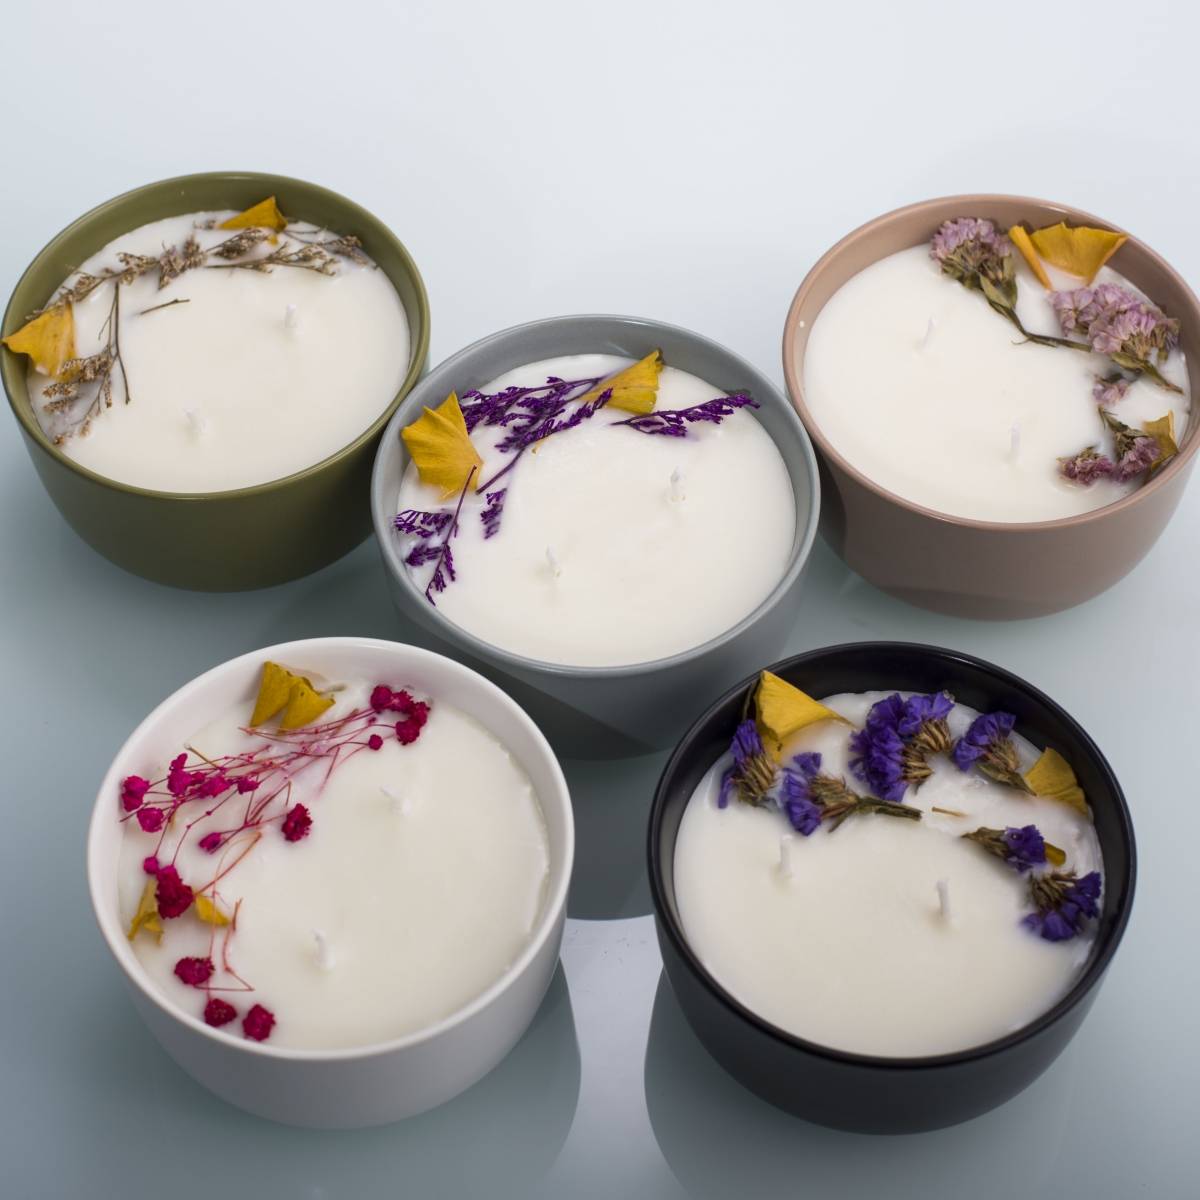 Scented Candles：Creed Aventus , China Factory, Wholesale Price , Yellow Flower Bud ,Green Ceramic Pots , Perfume Candles-HOWCANDLE-Candles,Scented Candles,Aromatherapy Candles,Soy Candles,Vegan Candles,Jar Candles,Pillar Candles,Candle Gift Sets,Essential Oils,Reed Diffuser,Candle Holder,